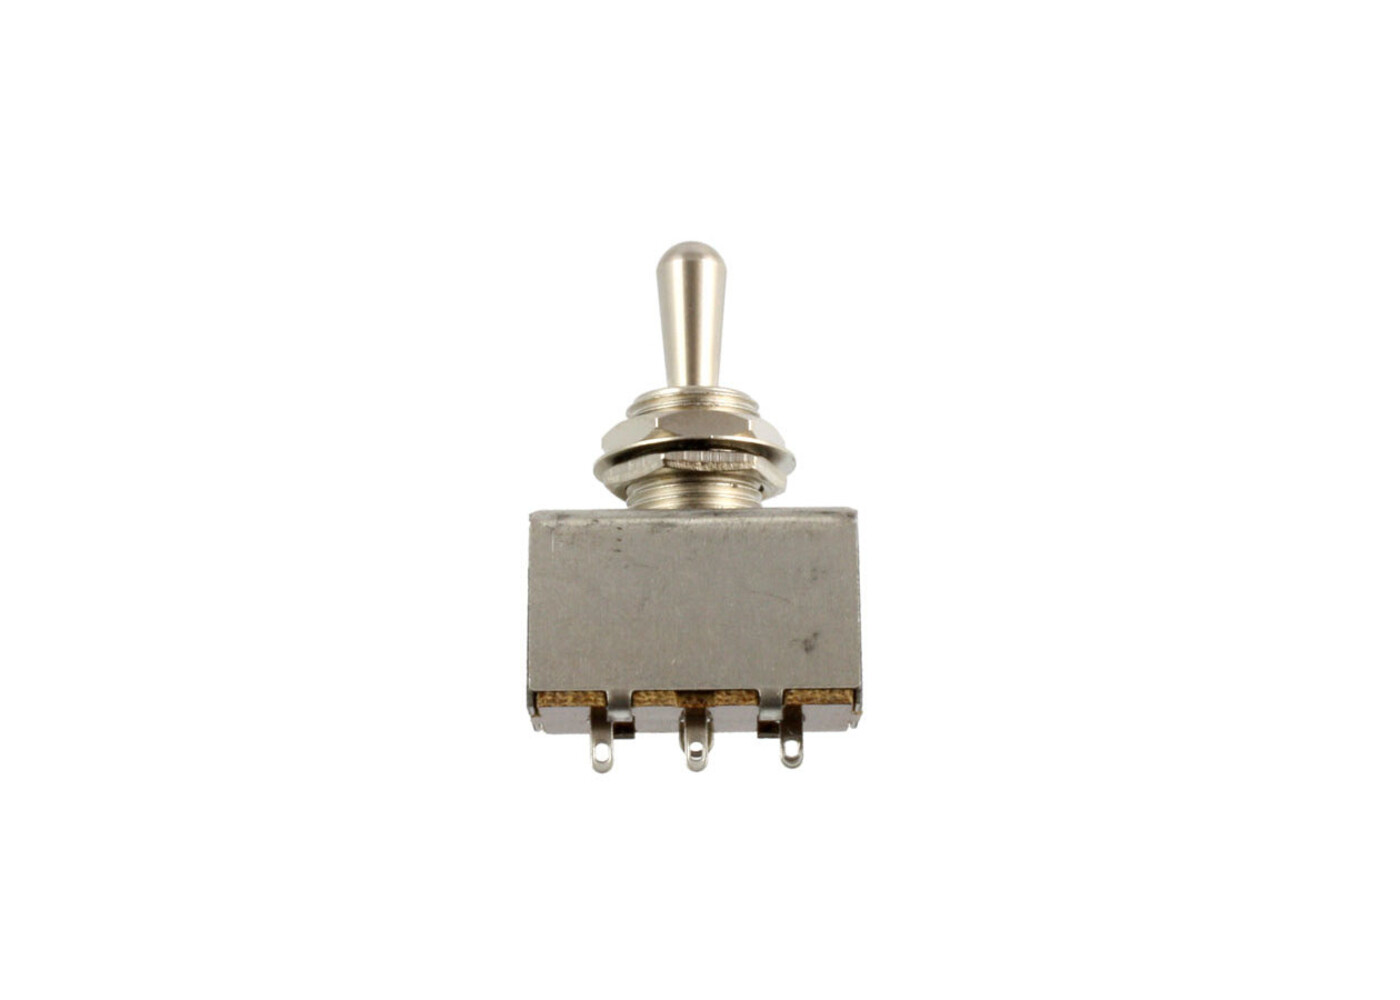 Allparts Allparts 3-way Toggle Switch for Danelectro Guitars, Chrome